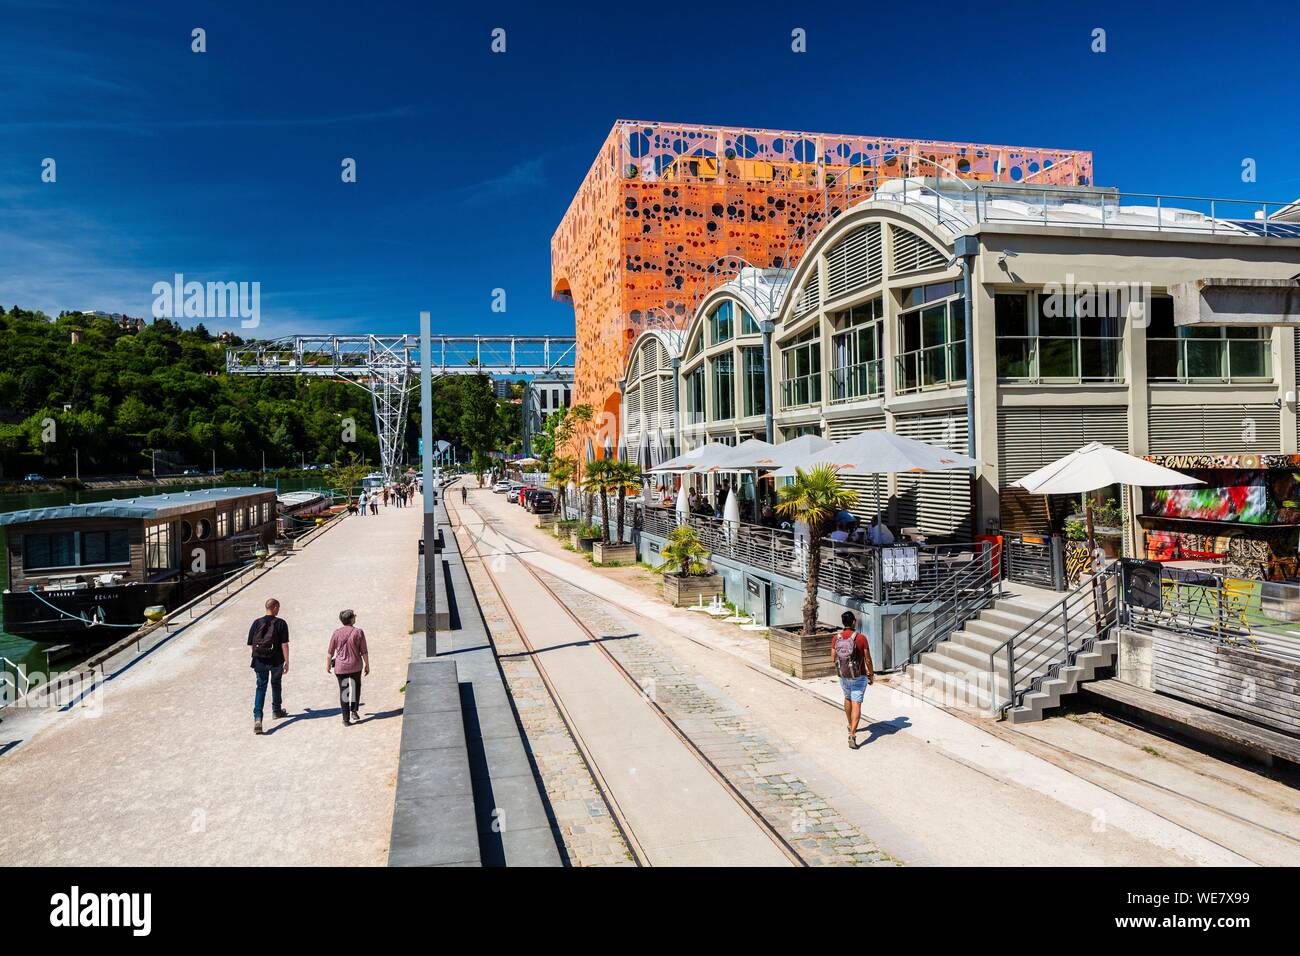 France, Rhone, Lyon, La Confluence district south of the Presqu'ile, close to the confluence of the Rhone and the Saone rivers, quai Rambaud along the former docks, Selcius restaurant and Pavillon des Salins also called Cube Orange Stock Photo